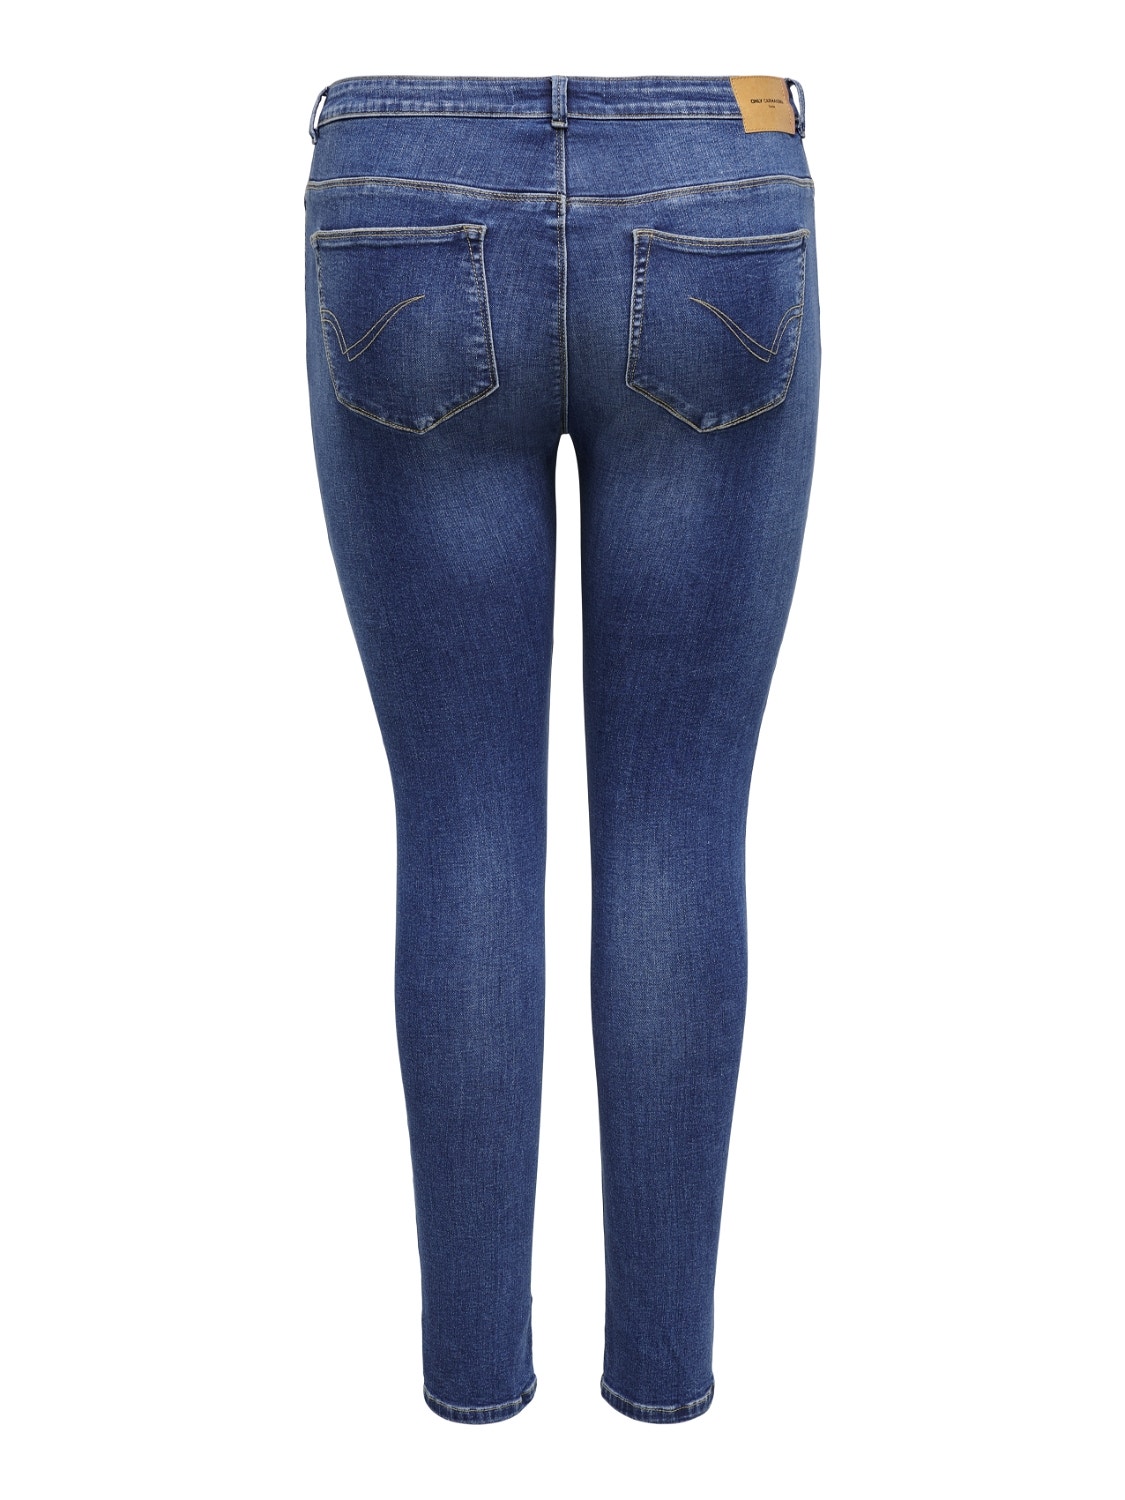 ONLY Skinny Fit Hohe Taille Jeans -Medium Blue Denim - 15245171